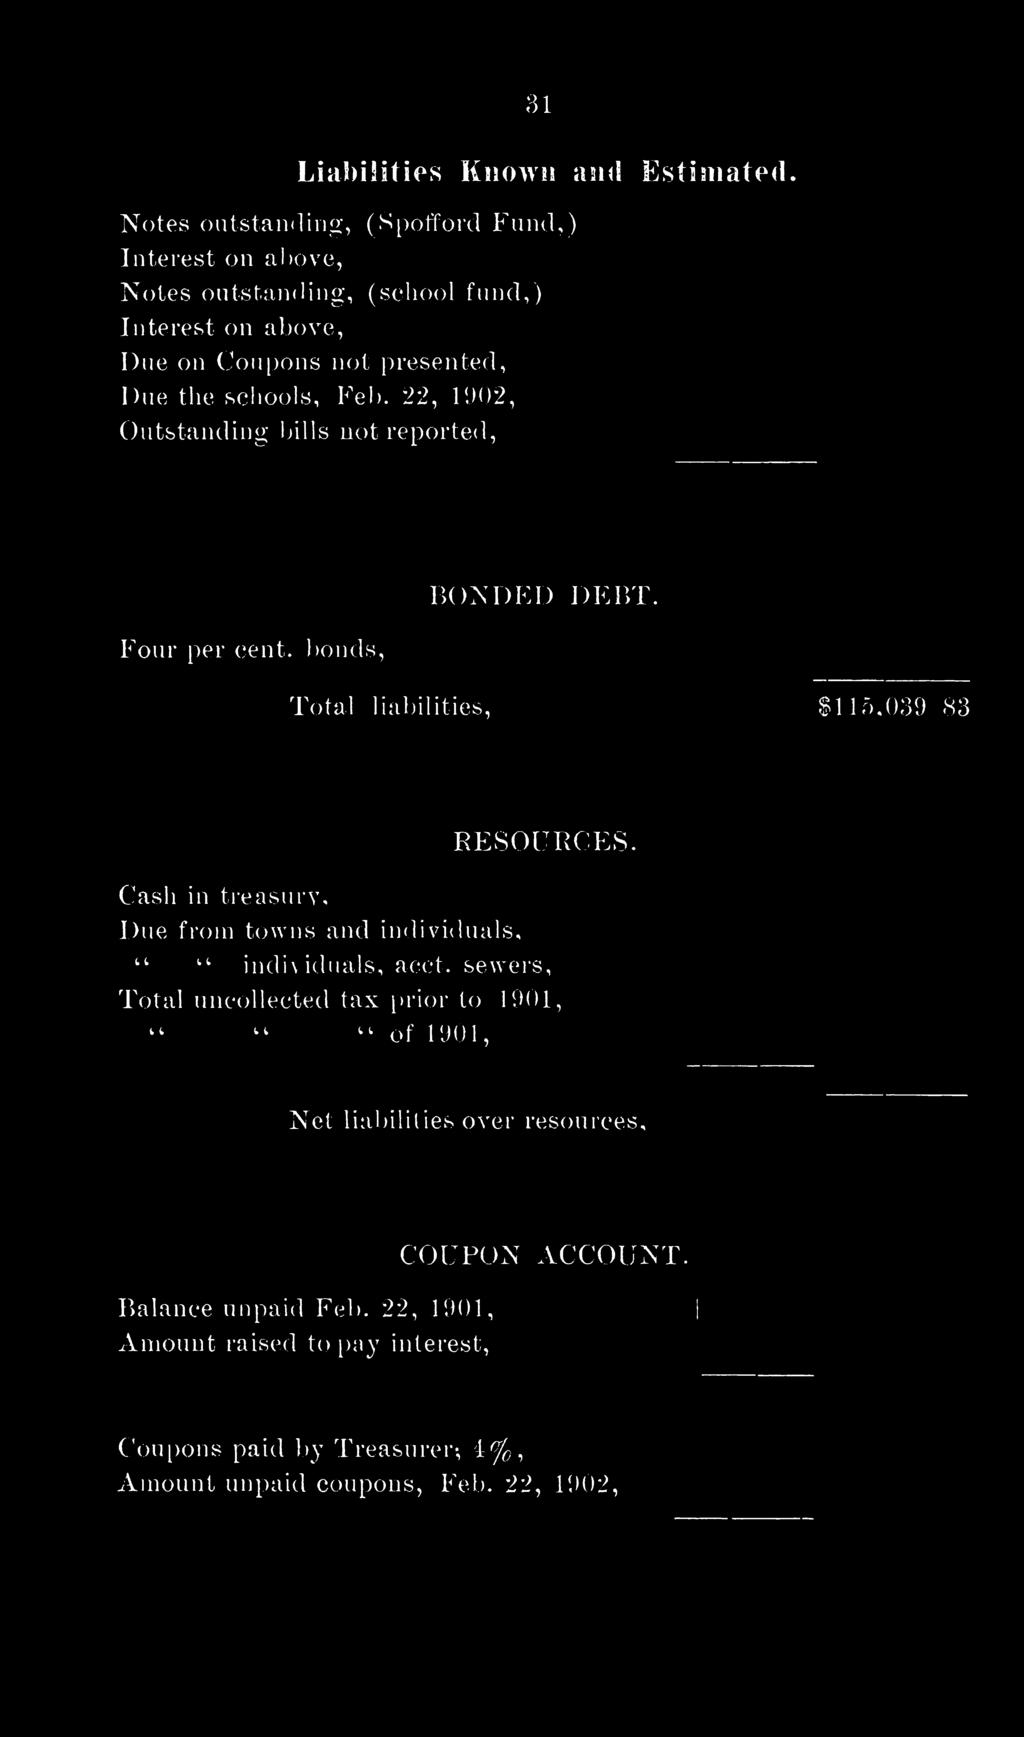 Feb. 22, 1902, Outstanding bills not reported, Four per cent, bonds, BONDED DEBT. Total liabilities, $115,039 83 Cash in treasury. RESOURCES.